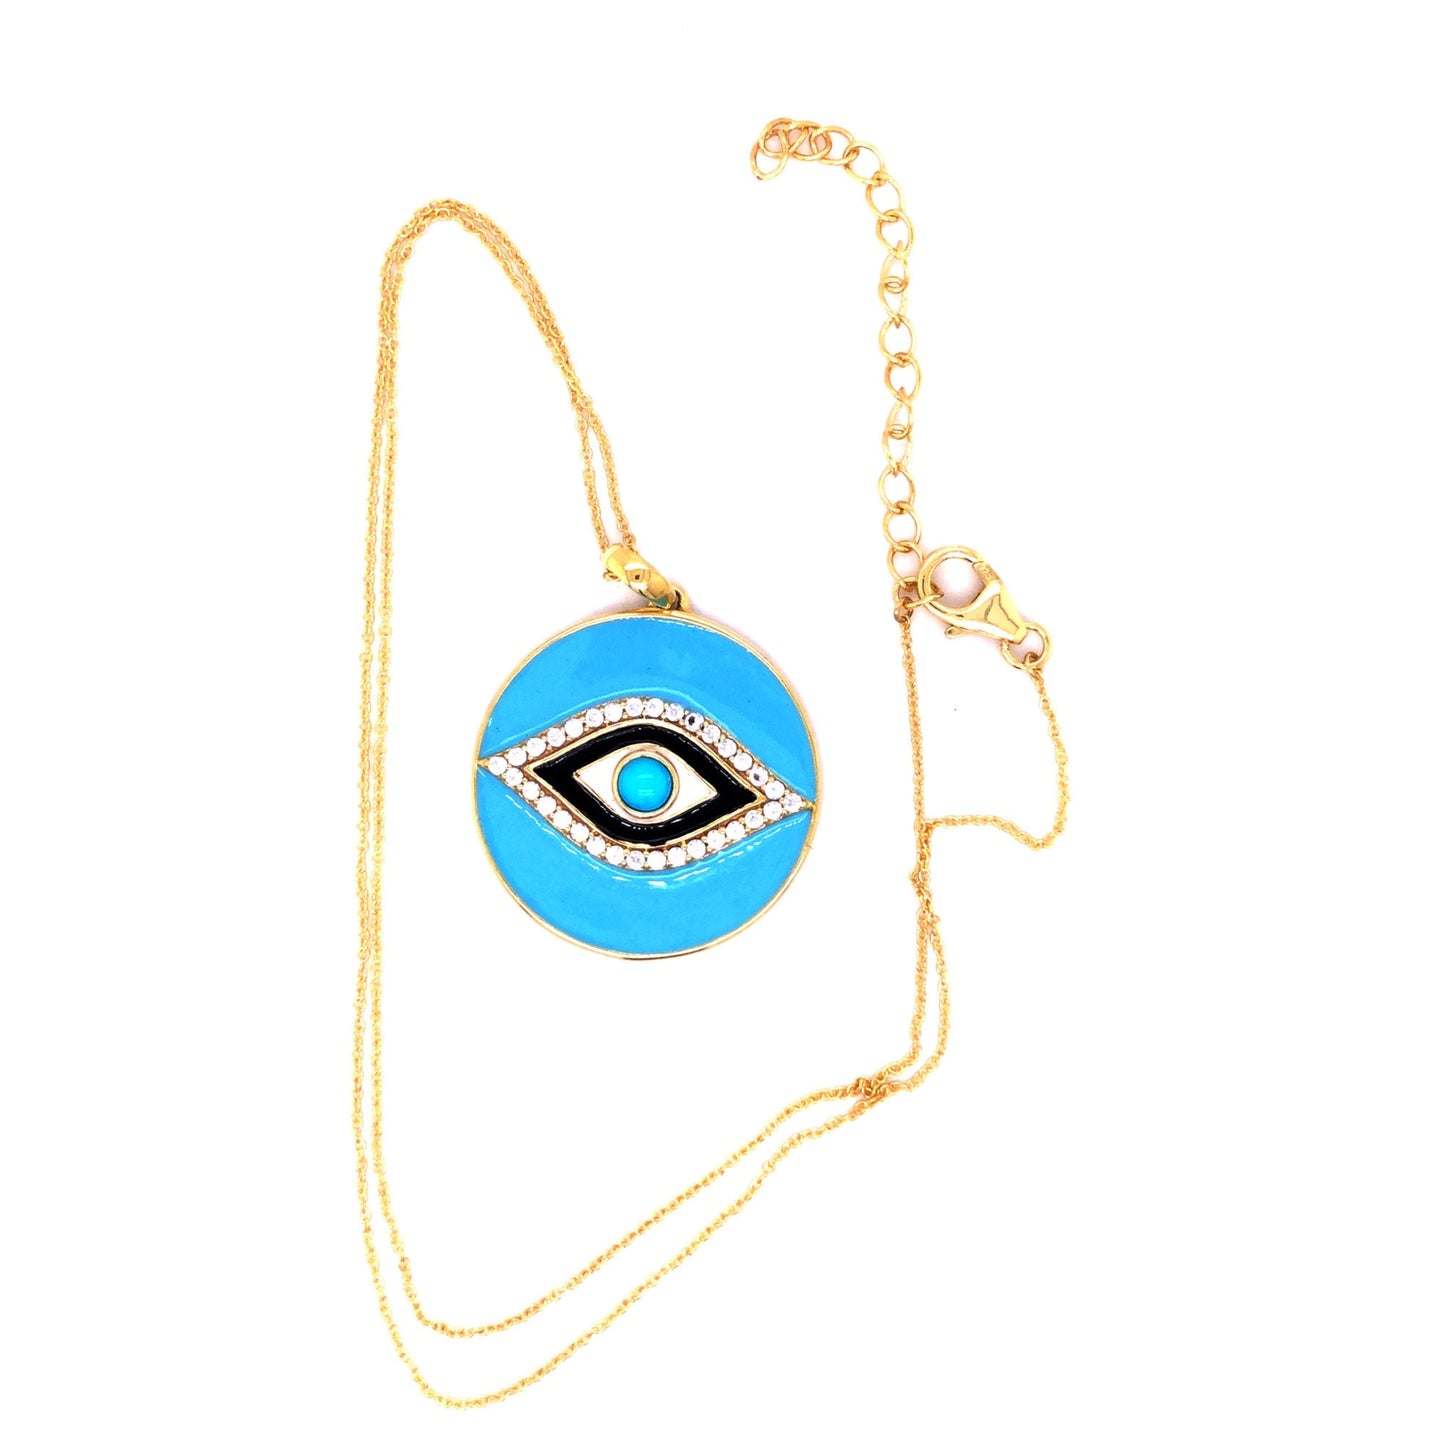 Evil Eye Necklace, Sleeping Beauty Turquoise Ring, 925 Sterling Silver Necklace, Gemstone jewelry, Witch Eye Necklace, Gift For Her